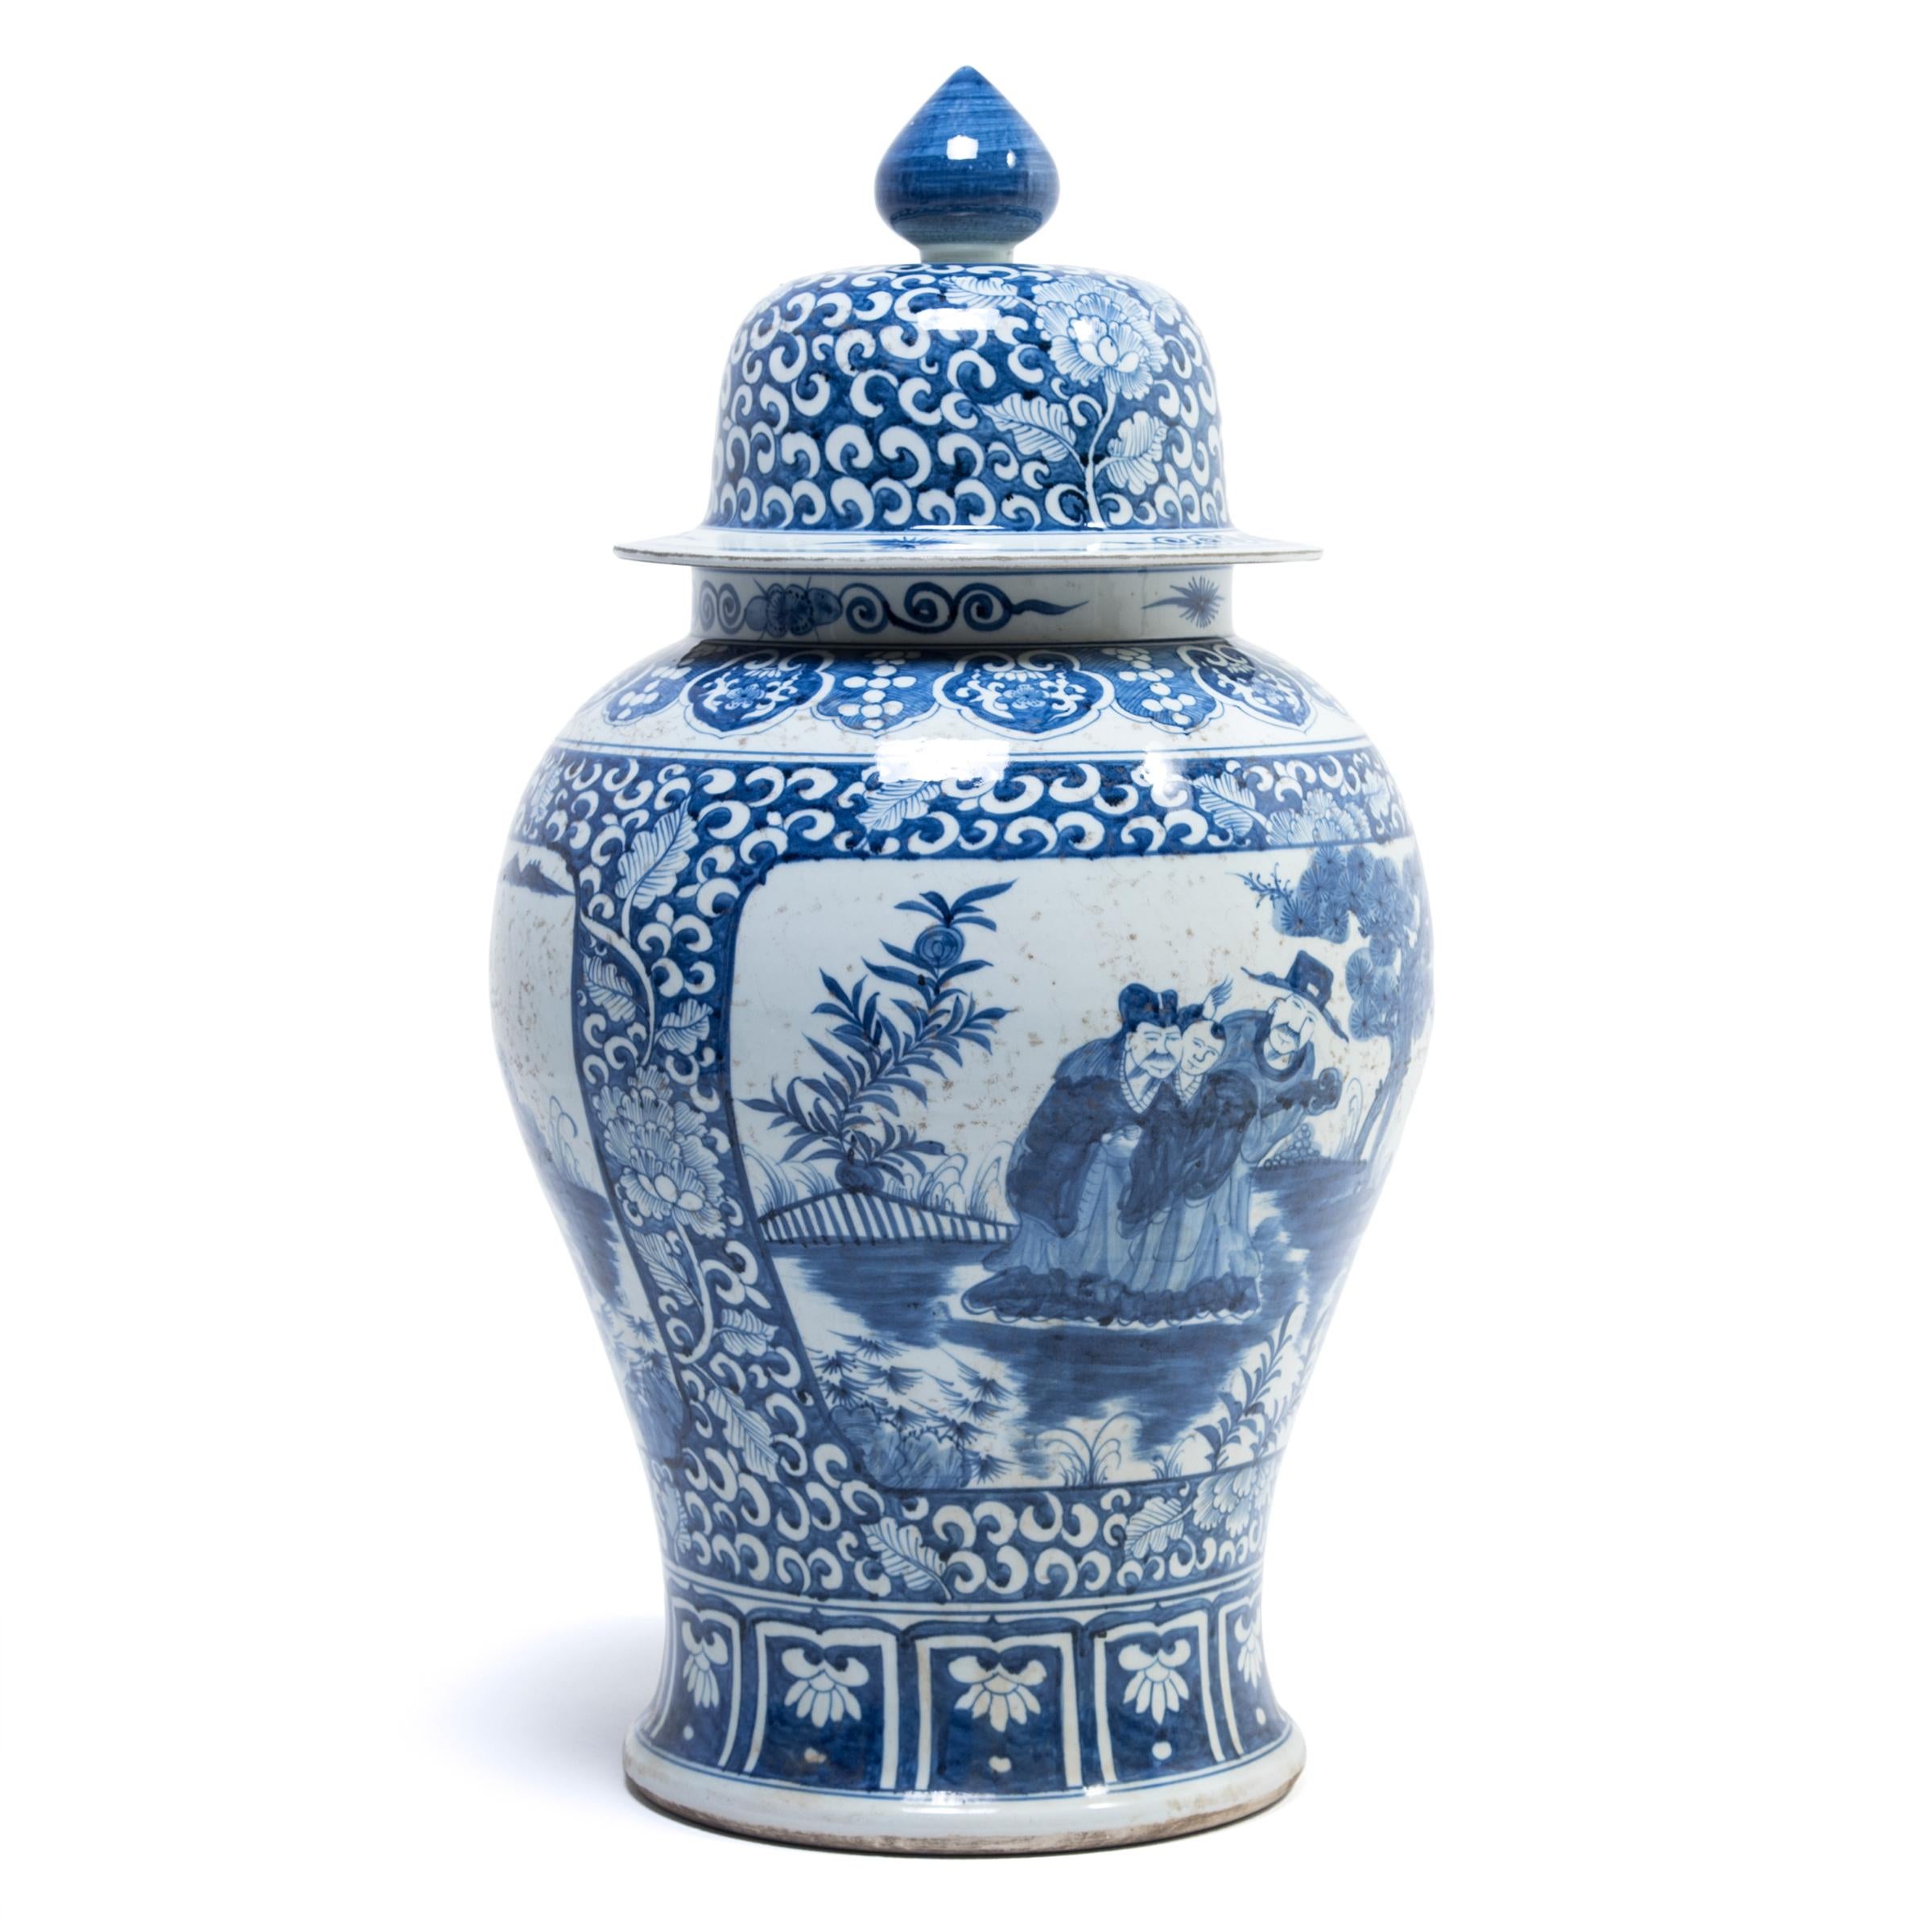 Long ago, ginger jars were used to store valuable spices and transport them from markets in the east to buyers in the west, hence their name. But, the containers have been collected mainly as decorative objects for the last 200 years when demand for